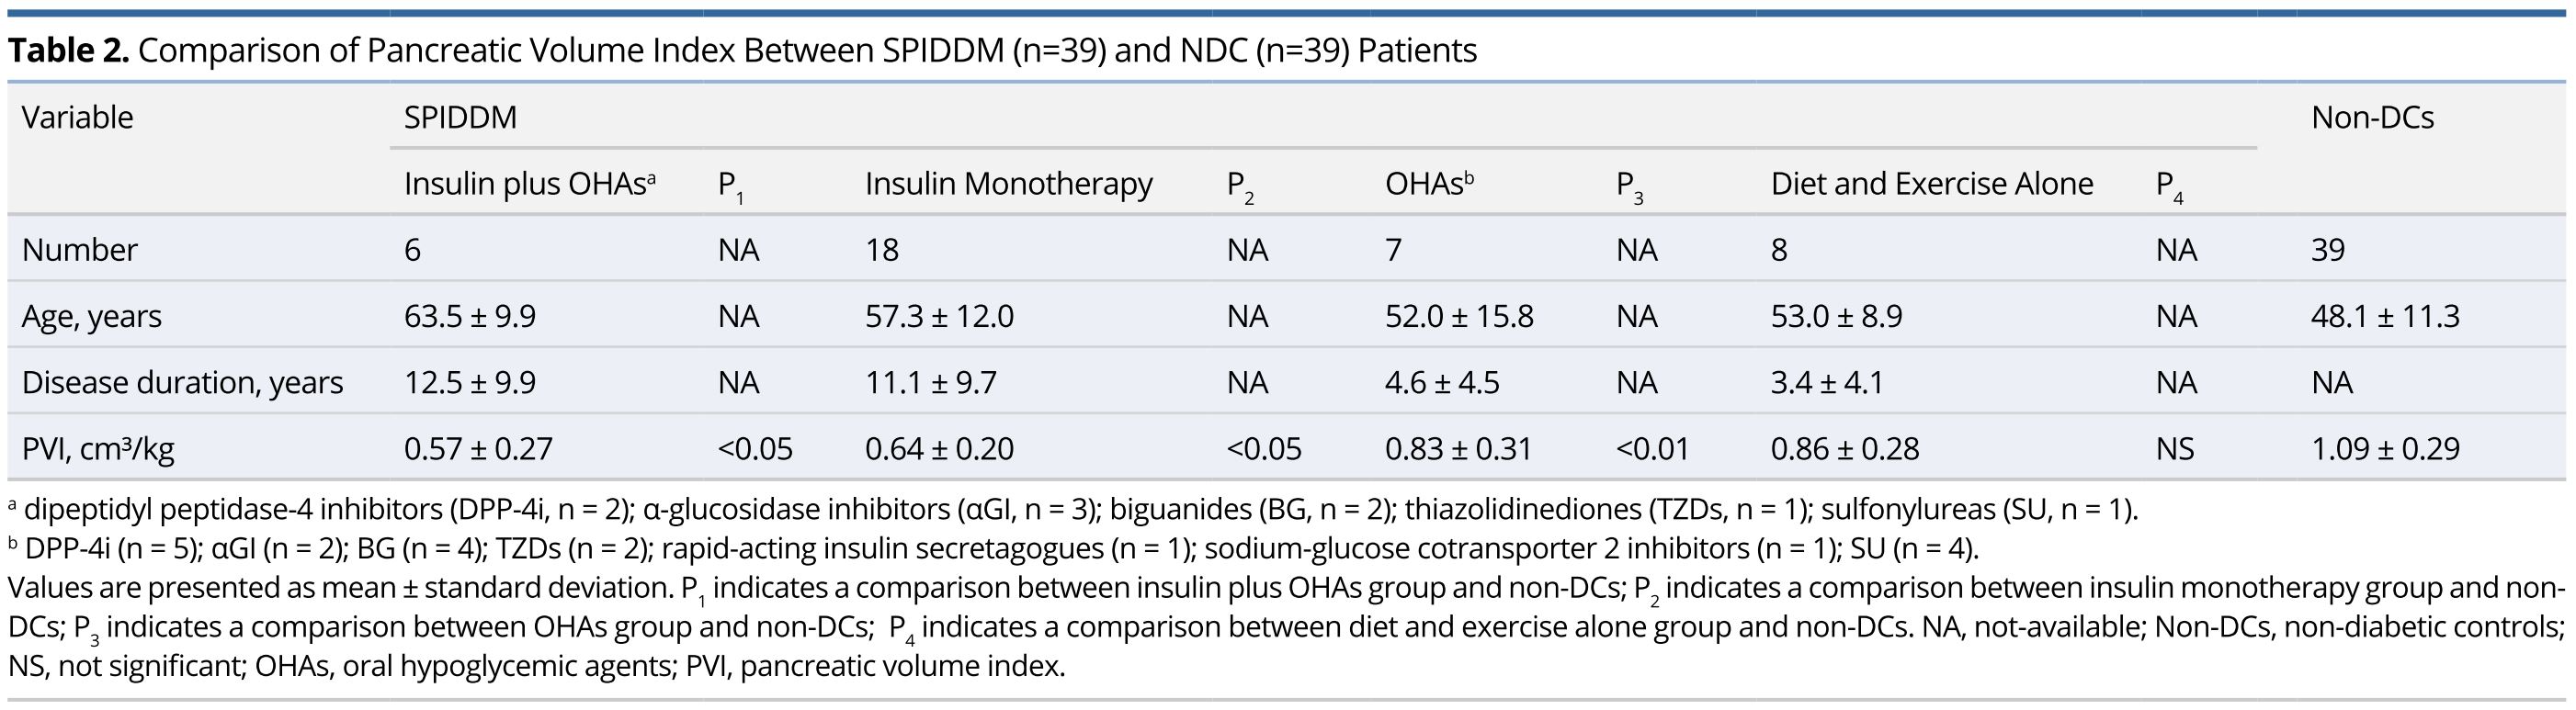 Table 2.JPGComparison of Pancreatic Volume Index Between SPIDDM (n=39) and NDC (n=39) Patients